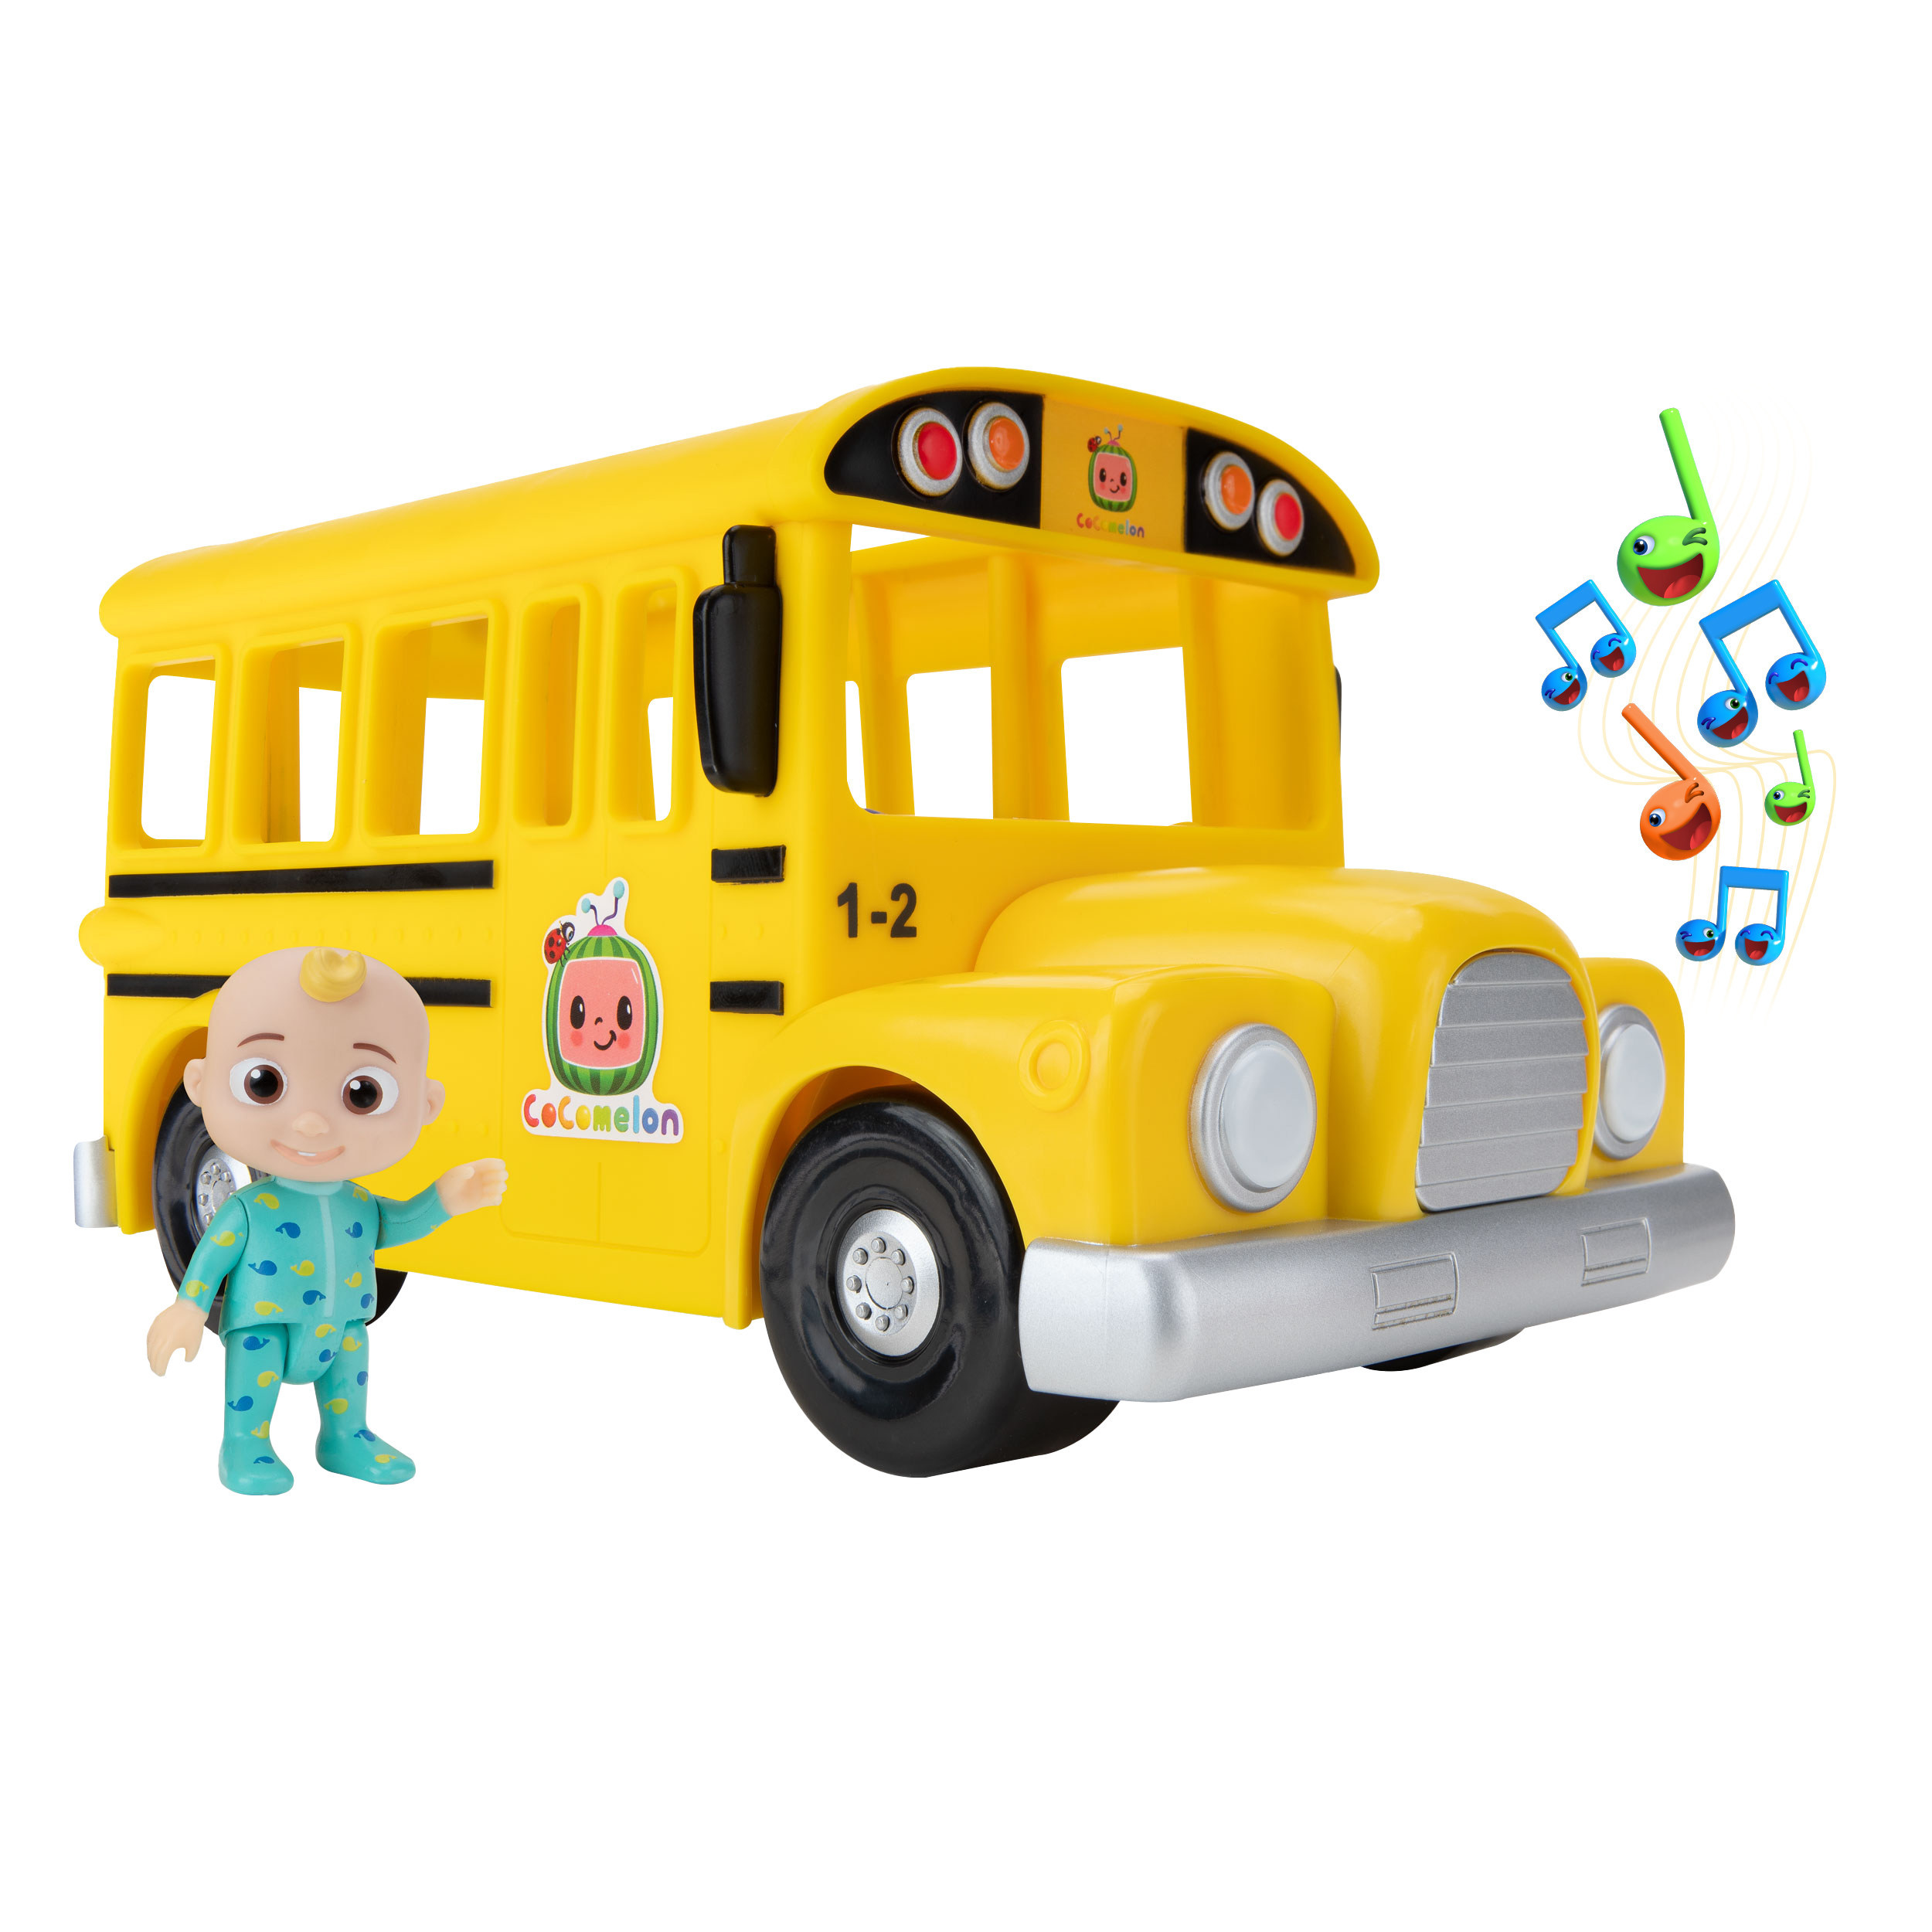 Jazwares Debuts First Toy Line For Cocomelon The 1 Youtube Channel For Kids And Preschoolers - roblox my restaurant jewelry case